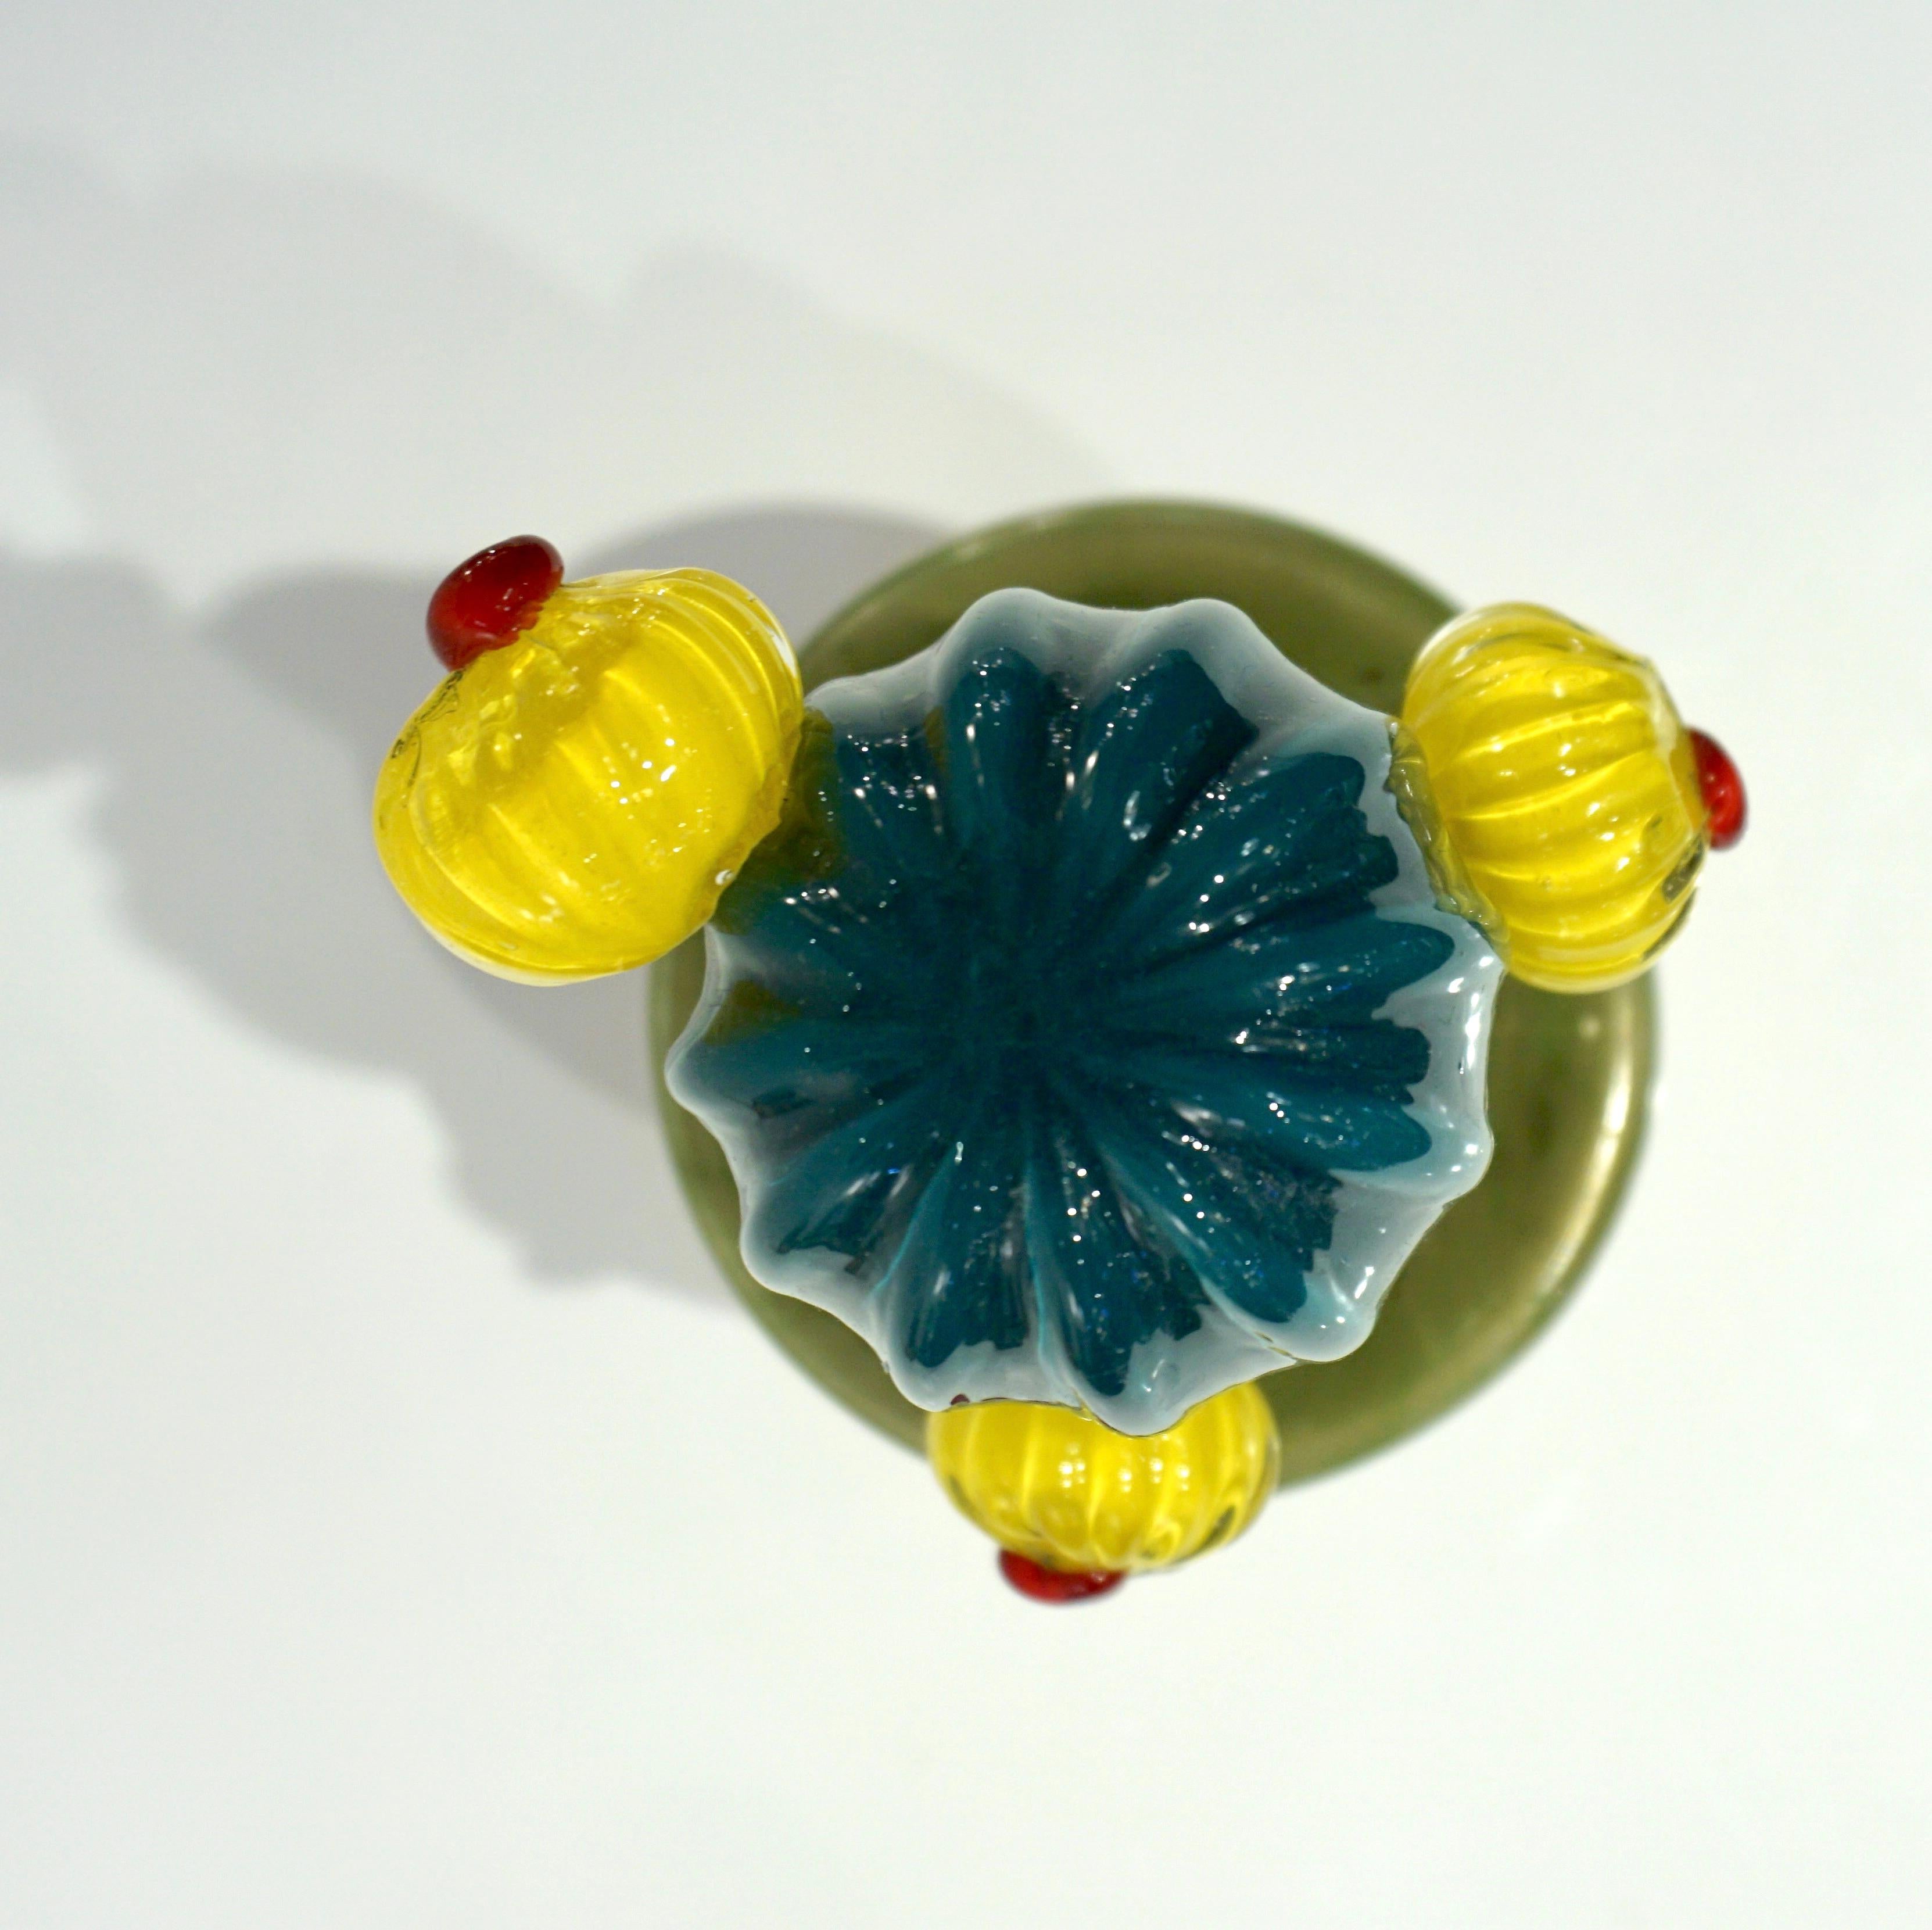 Contemporary 2000s Italian Teal Gold Green Murano Art Glass Cactus Plant with Yellow Flowers For Sale